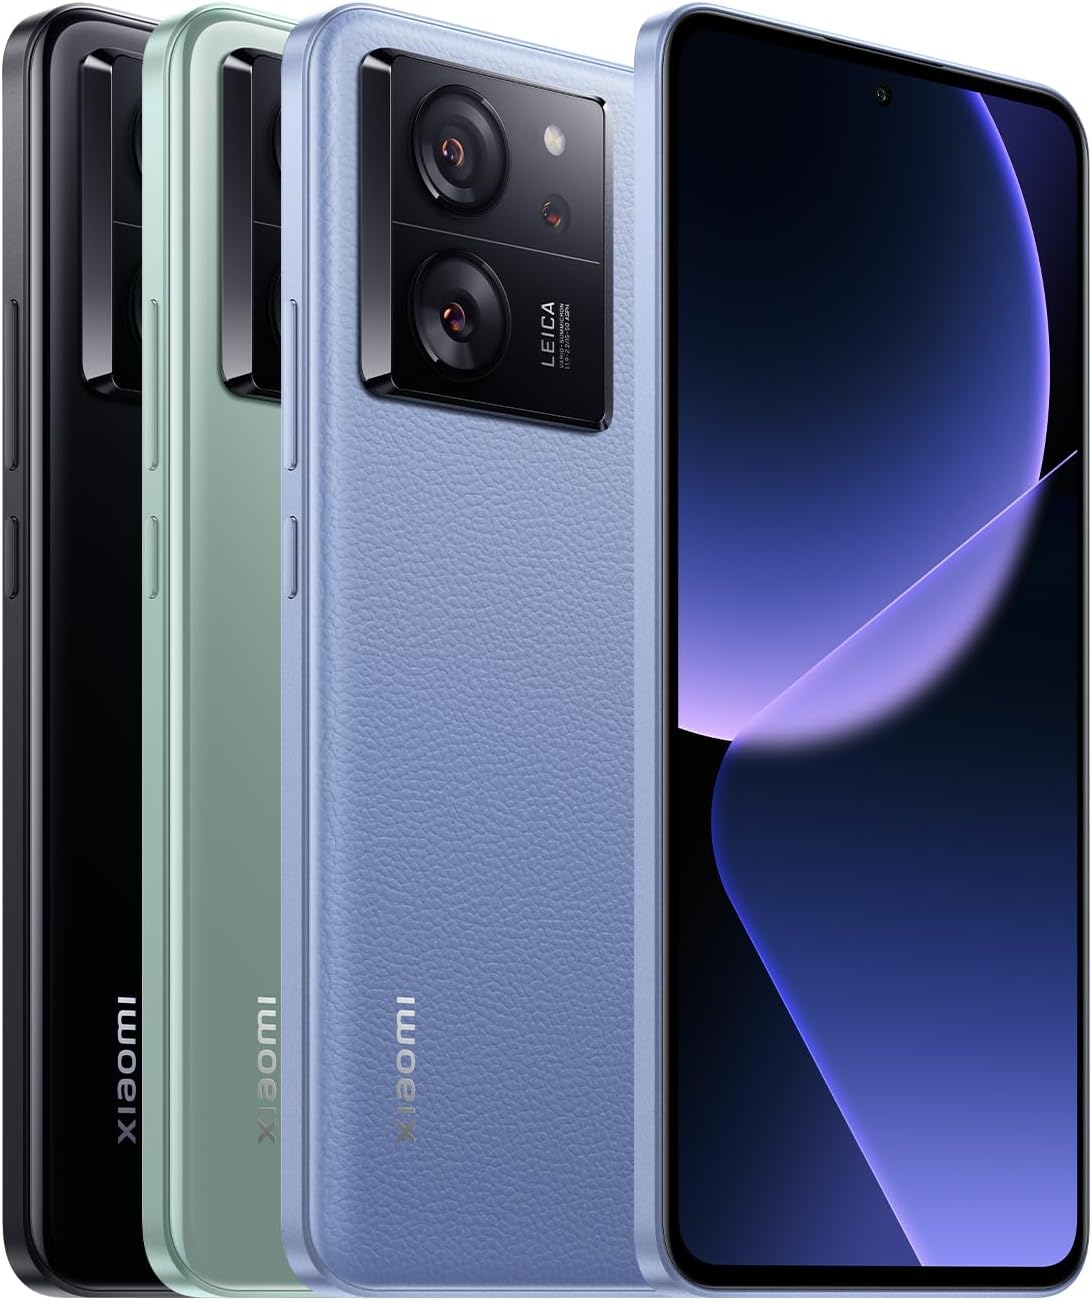 Xiaomi 13T Pro (Meadow Green 12GB RAM, 512 Storage) - Leica professional camera system |Powered by 120W HyperCharge |IP68 water & dust resistance | Leading 4nm processor +Free Xiaomi Smart Band 8